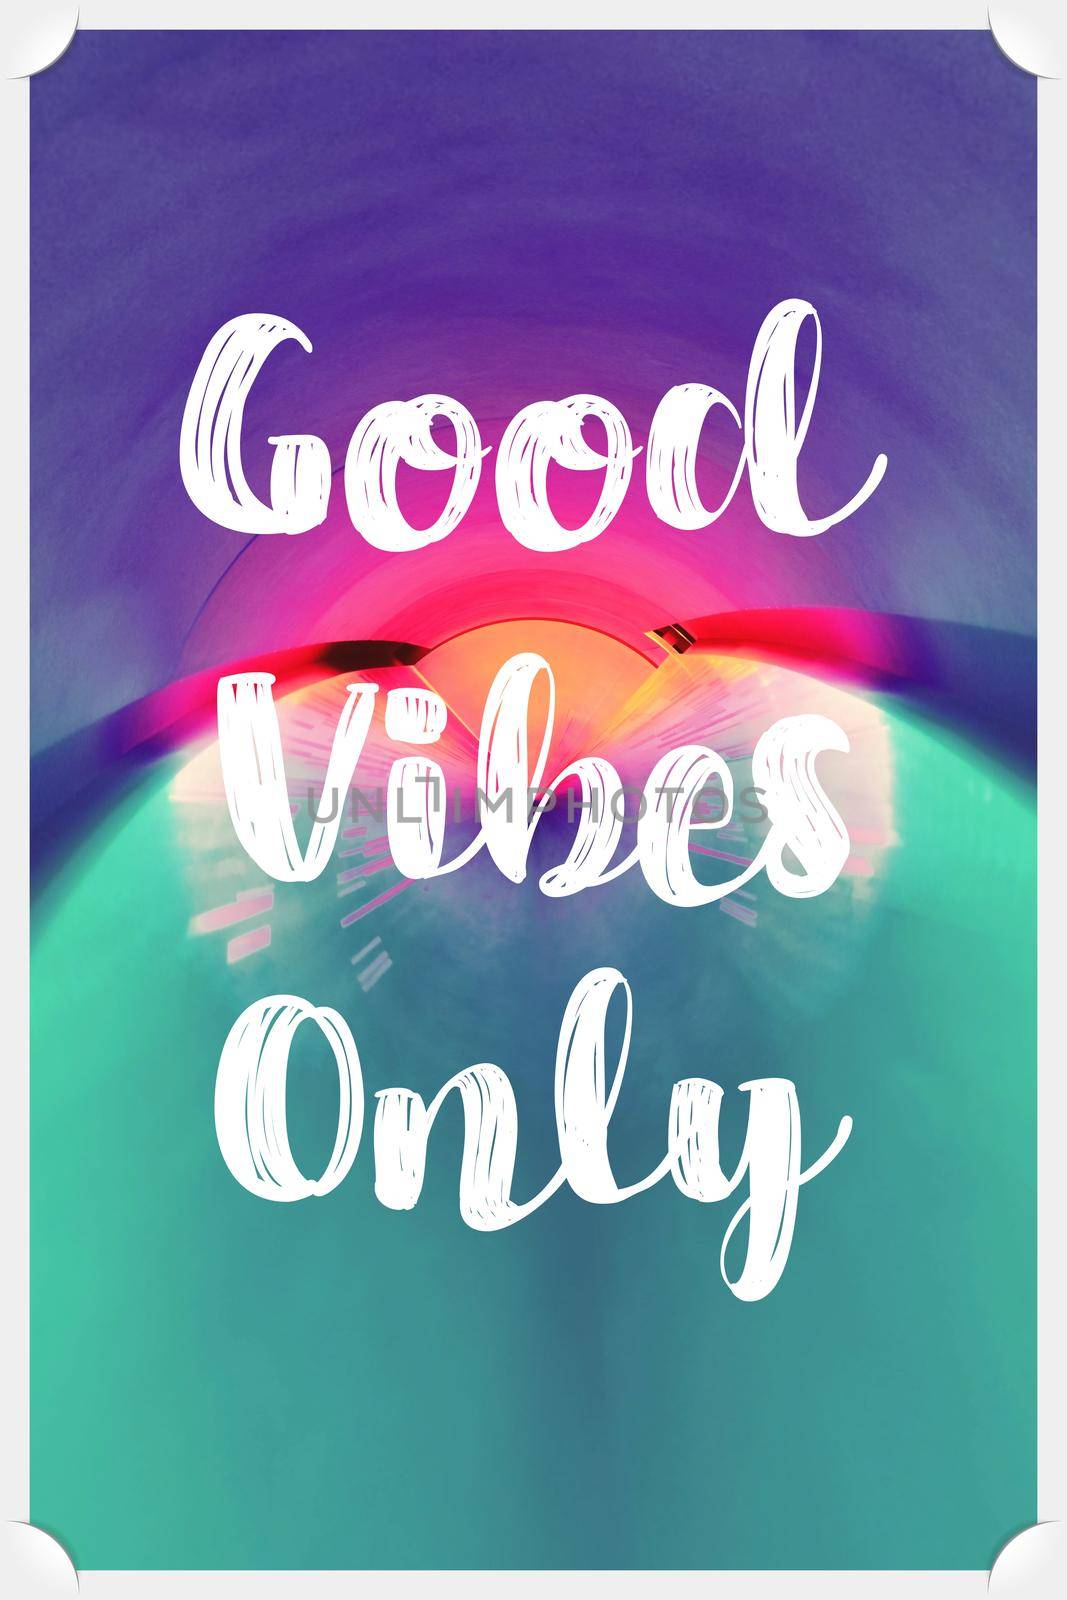 Good vibes only motivational poster 3d bold colorful retro style typography. Inspirational positive sign. Quote typographic illustration. by mrceviz